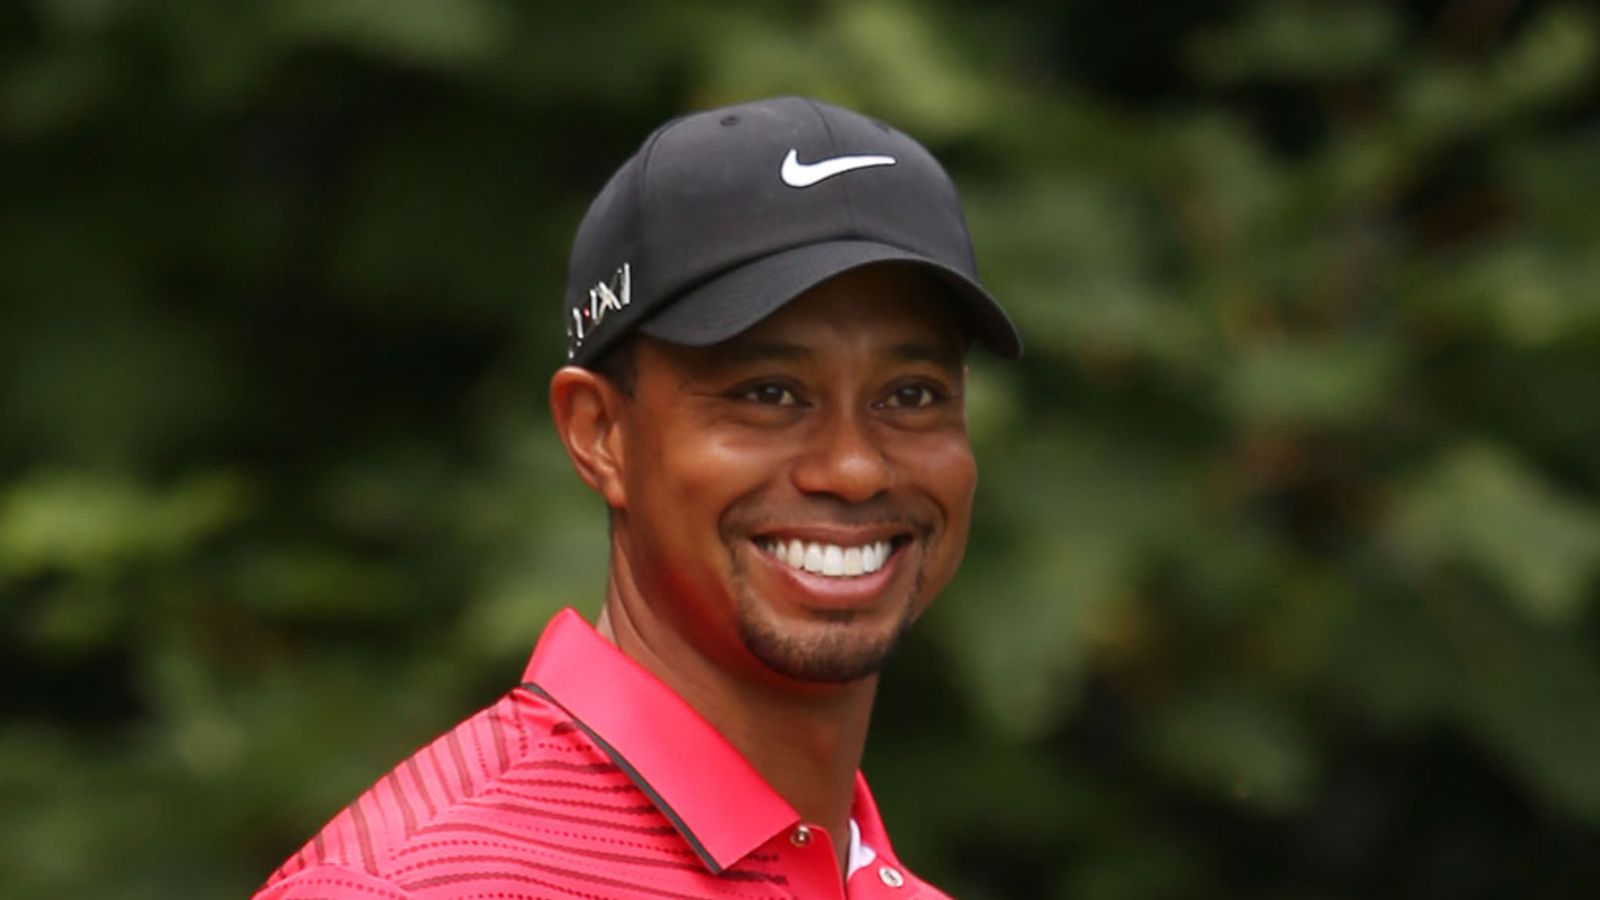 Mixed emotions for Woods | Golf News | Sky Sports